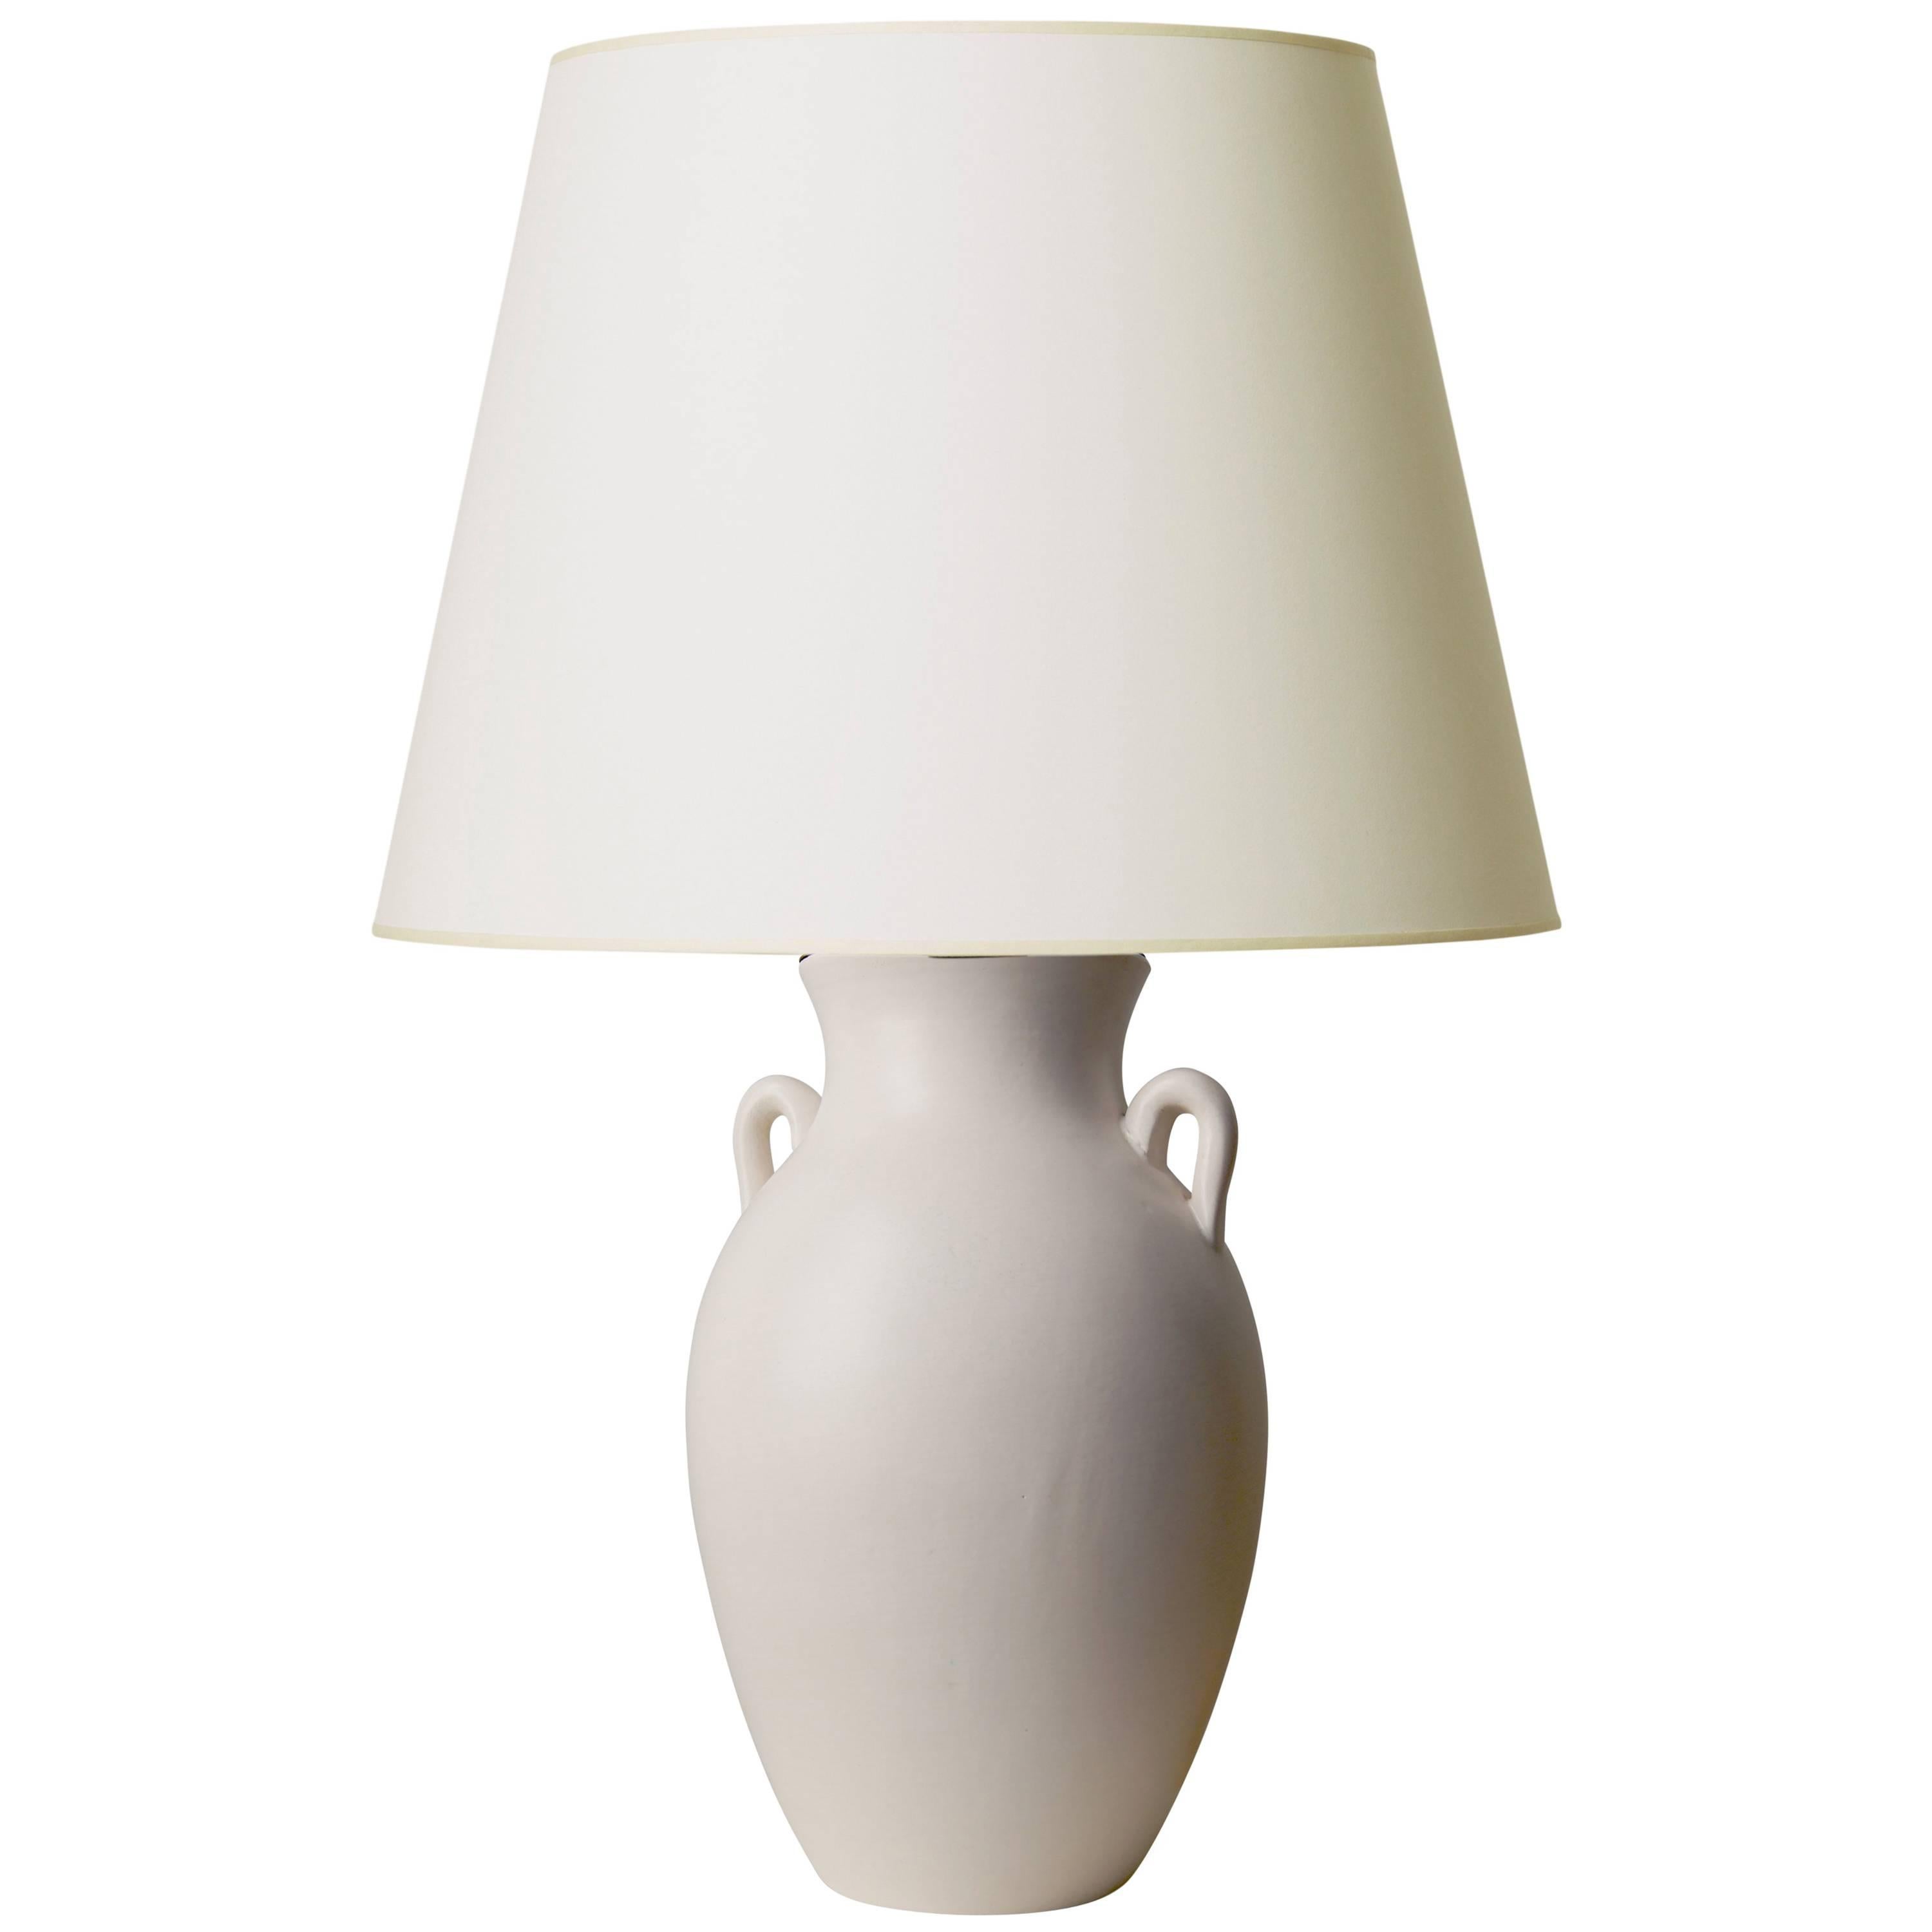 Exquisite Table Lamp with Amphora Form in Ivory Eggshell Glaze by Keramos For Sale